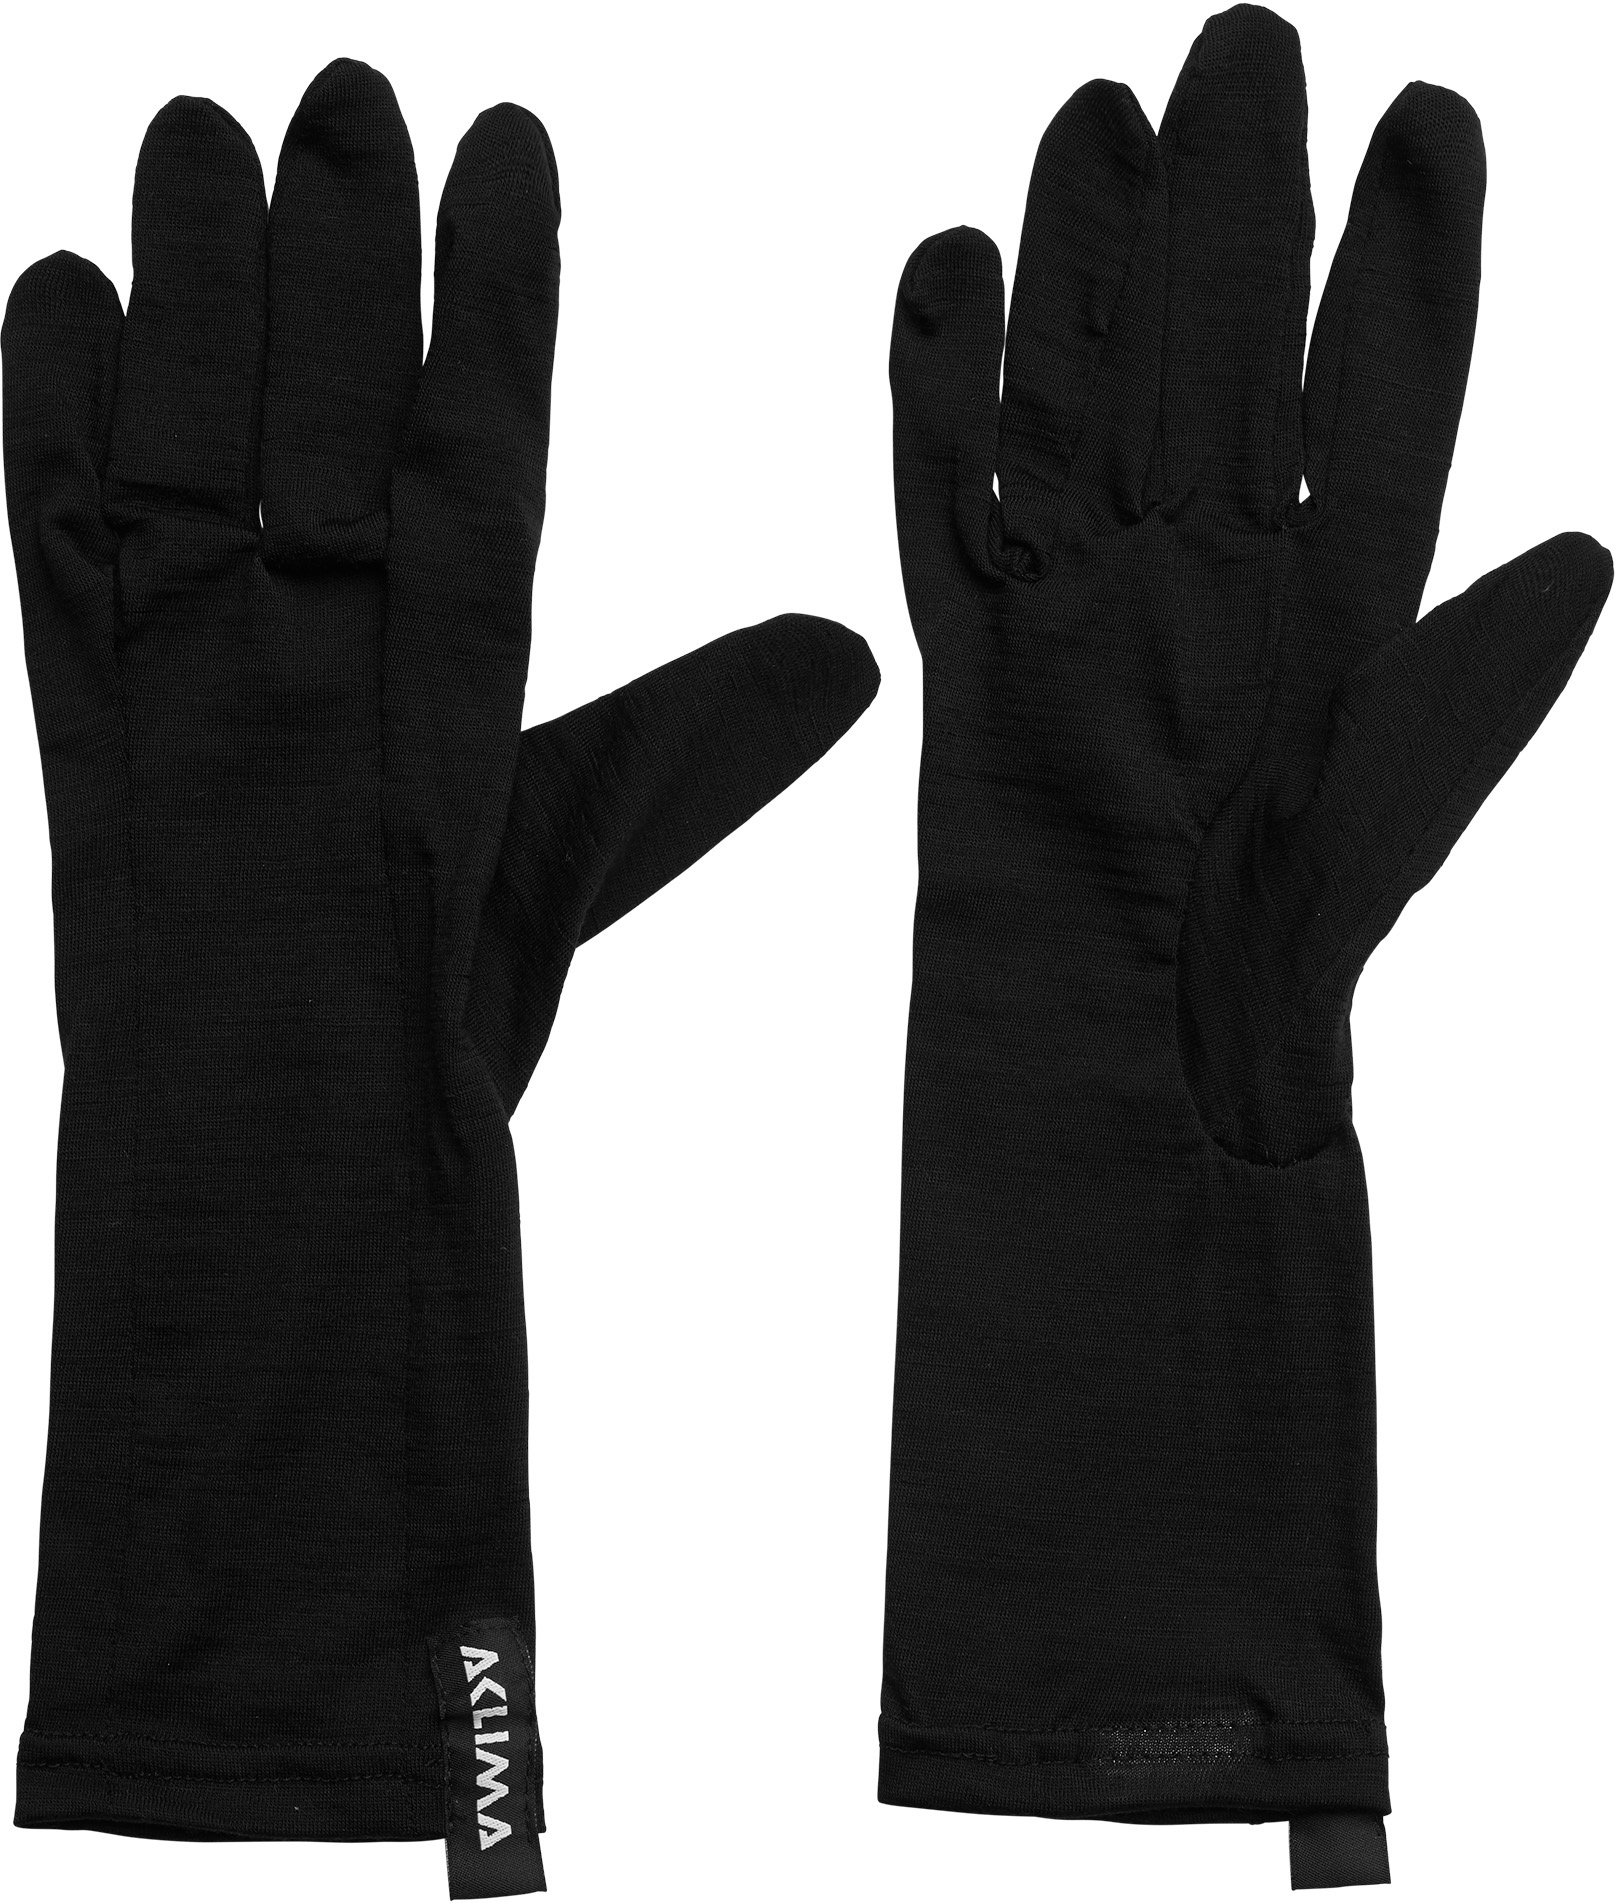 Aclima LightWool Liner Gloves